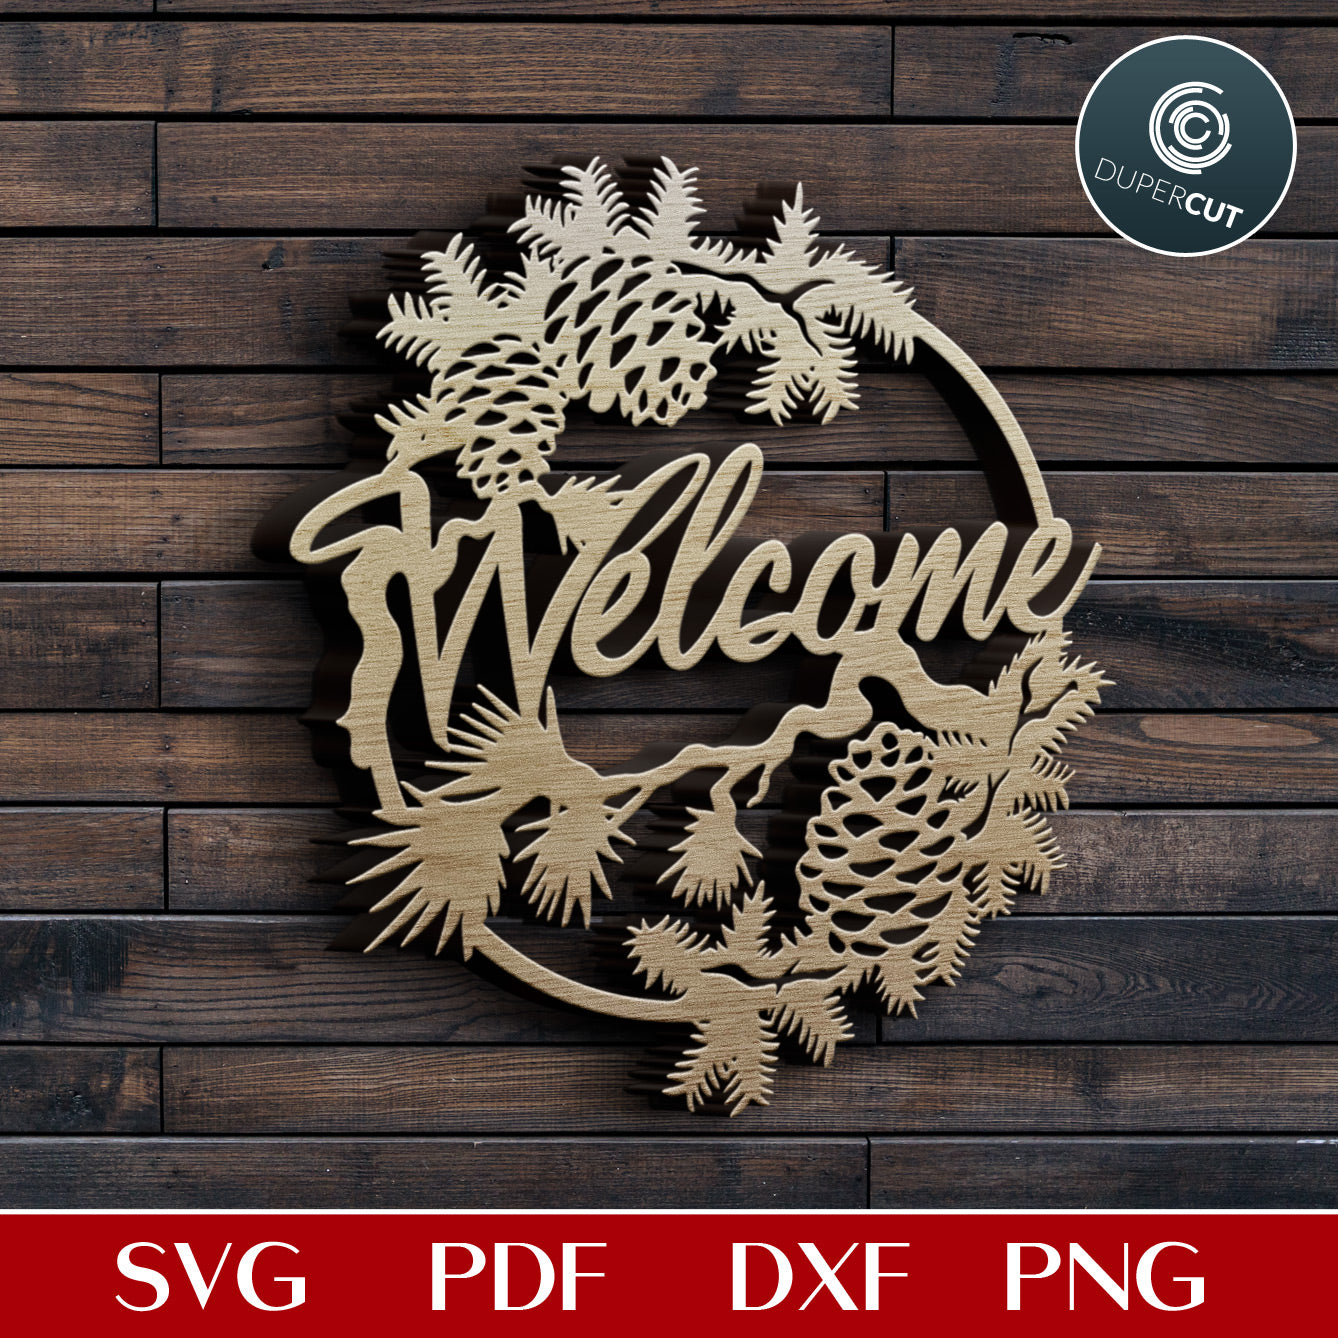 Welcome signs bundle - pinecone wilderness welcome - dual layer laser cutting files - SVG PDF DXF vector designs for Glowforge, Cricut, Silhouette Cameo, CNC plasma machines by DuperCut